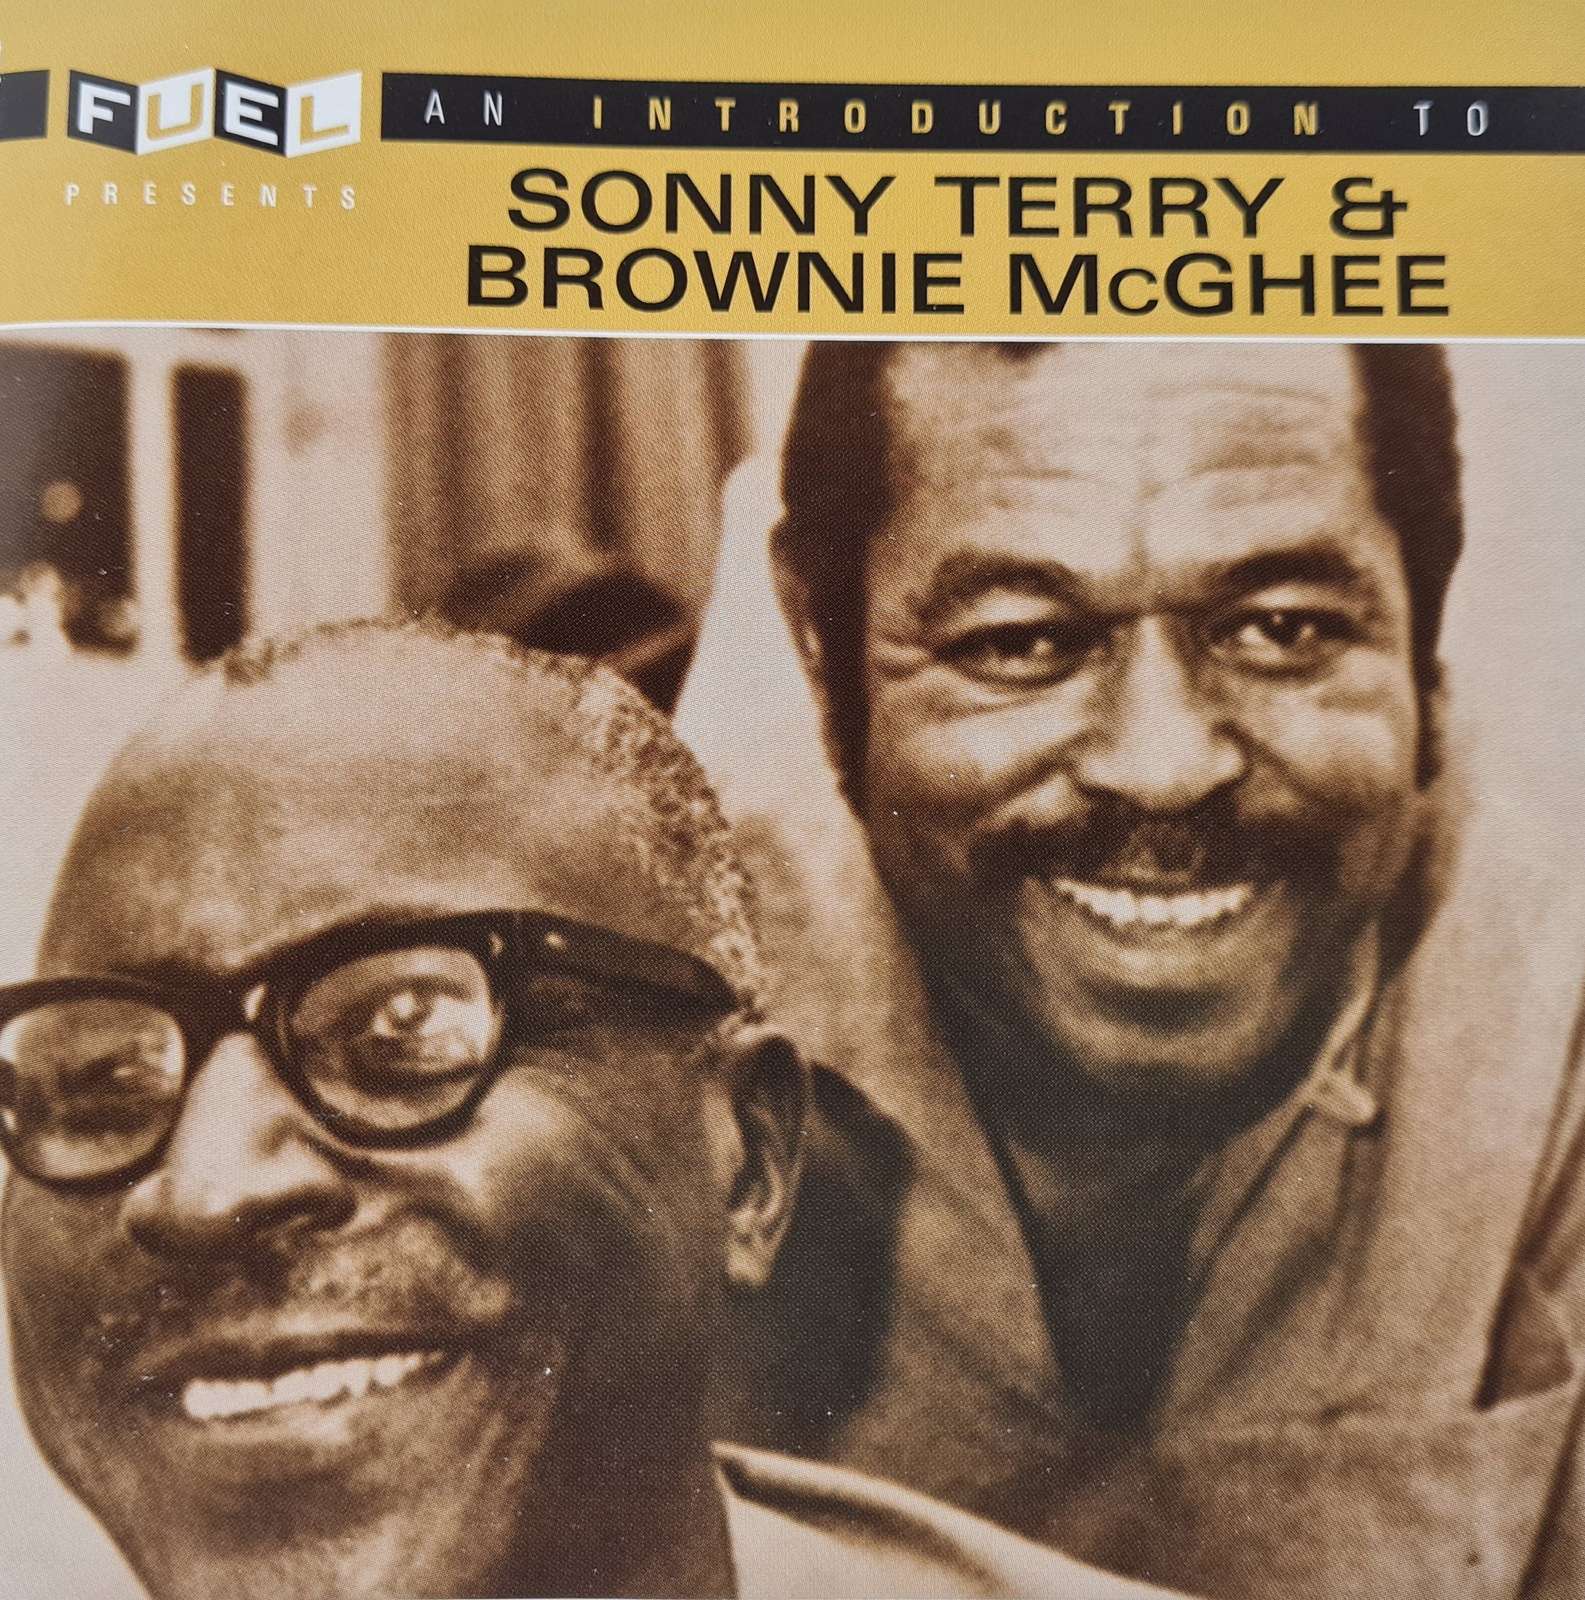 Sonny Terry & Brownie McGhee - An Introduction to (CD)